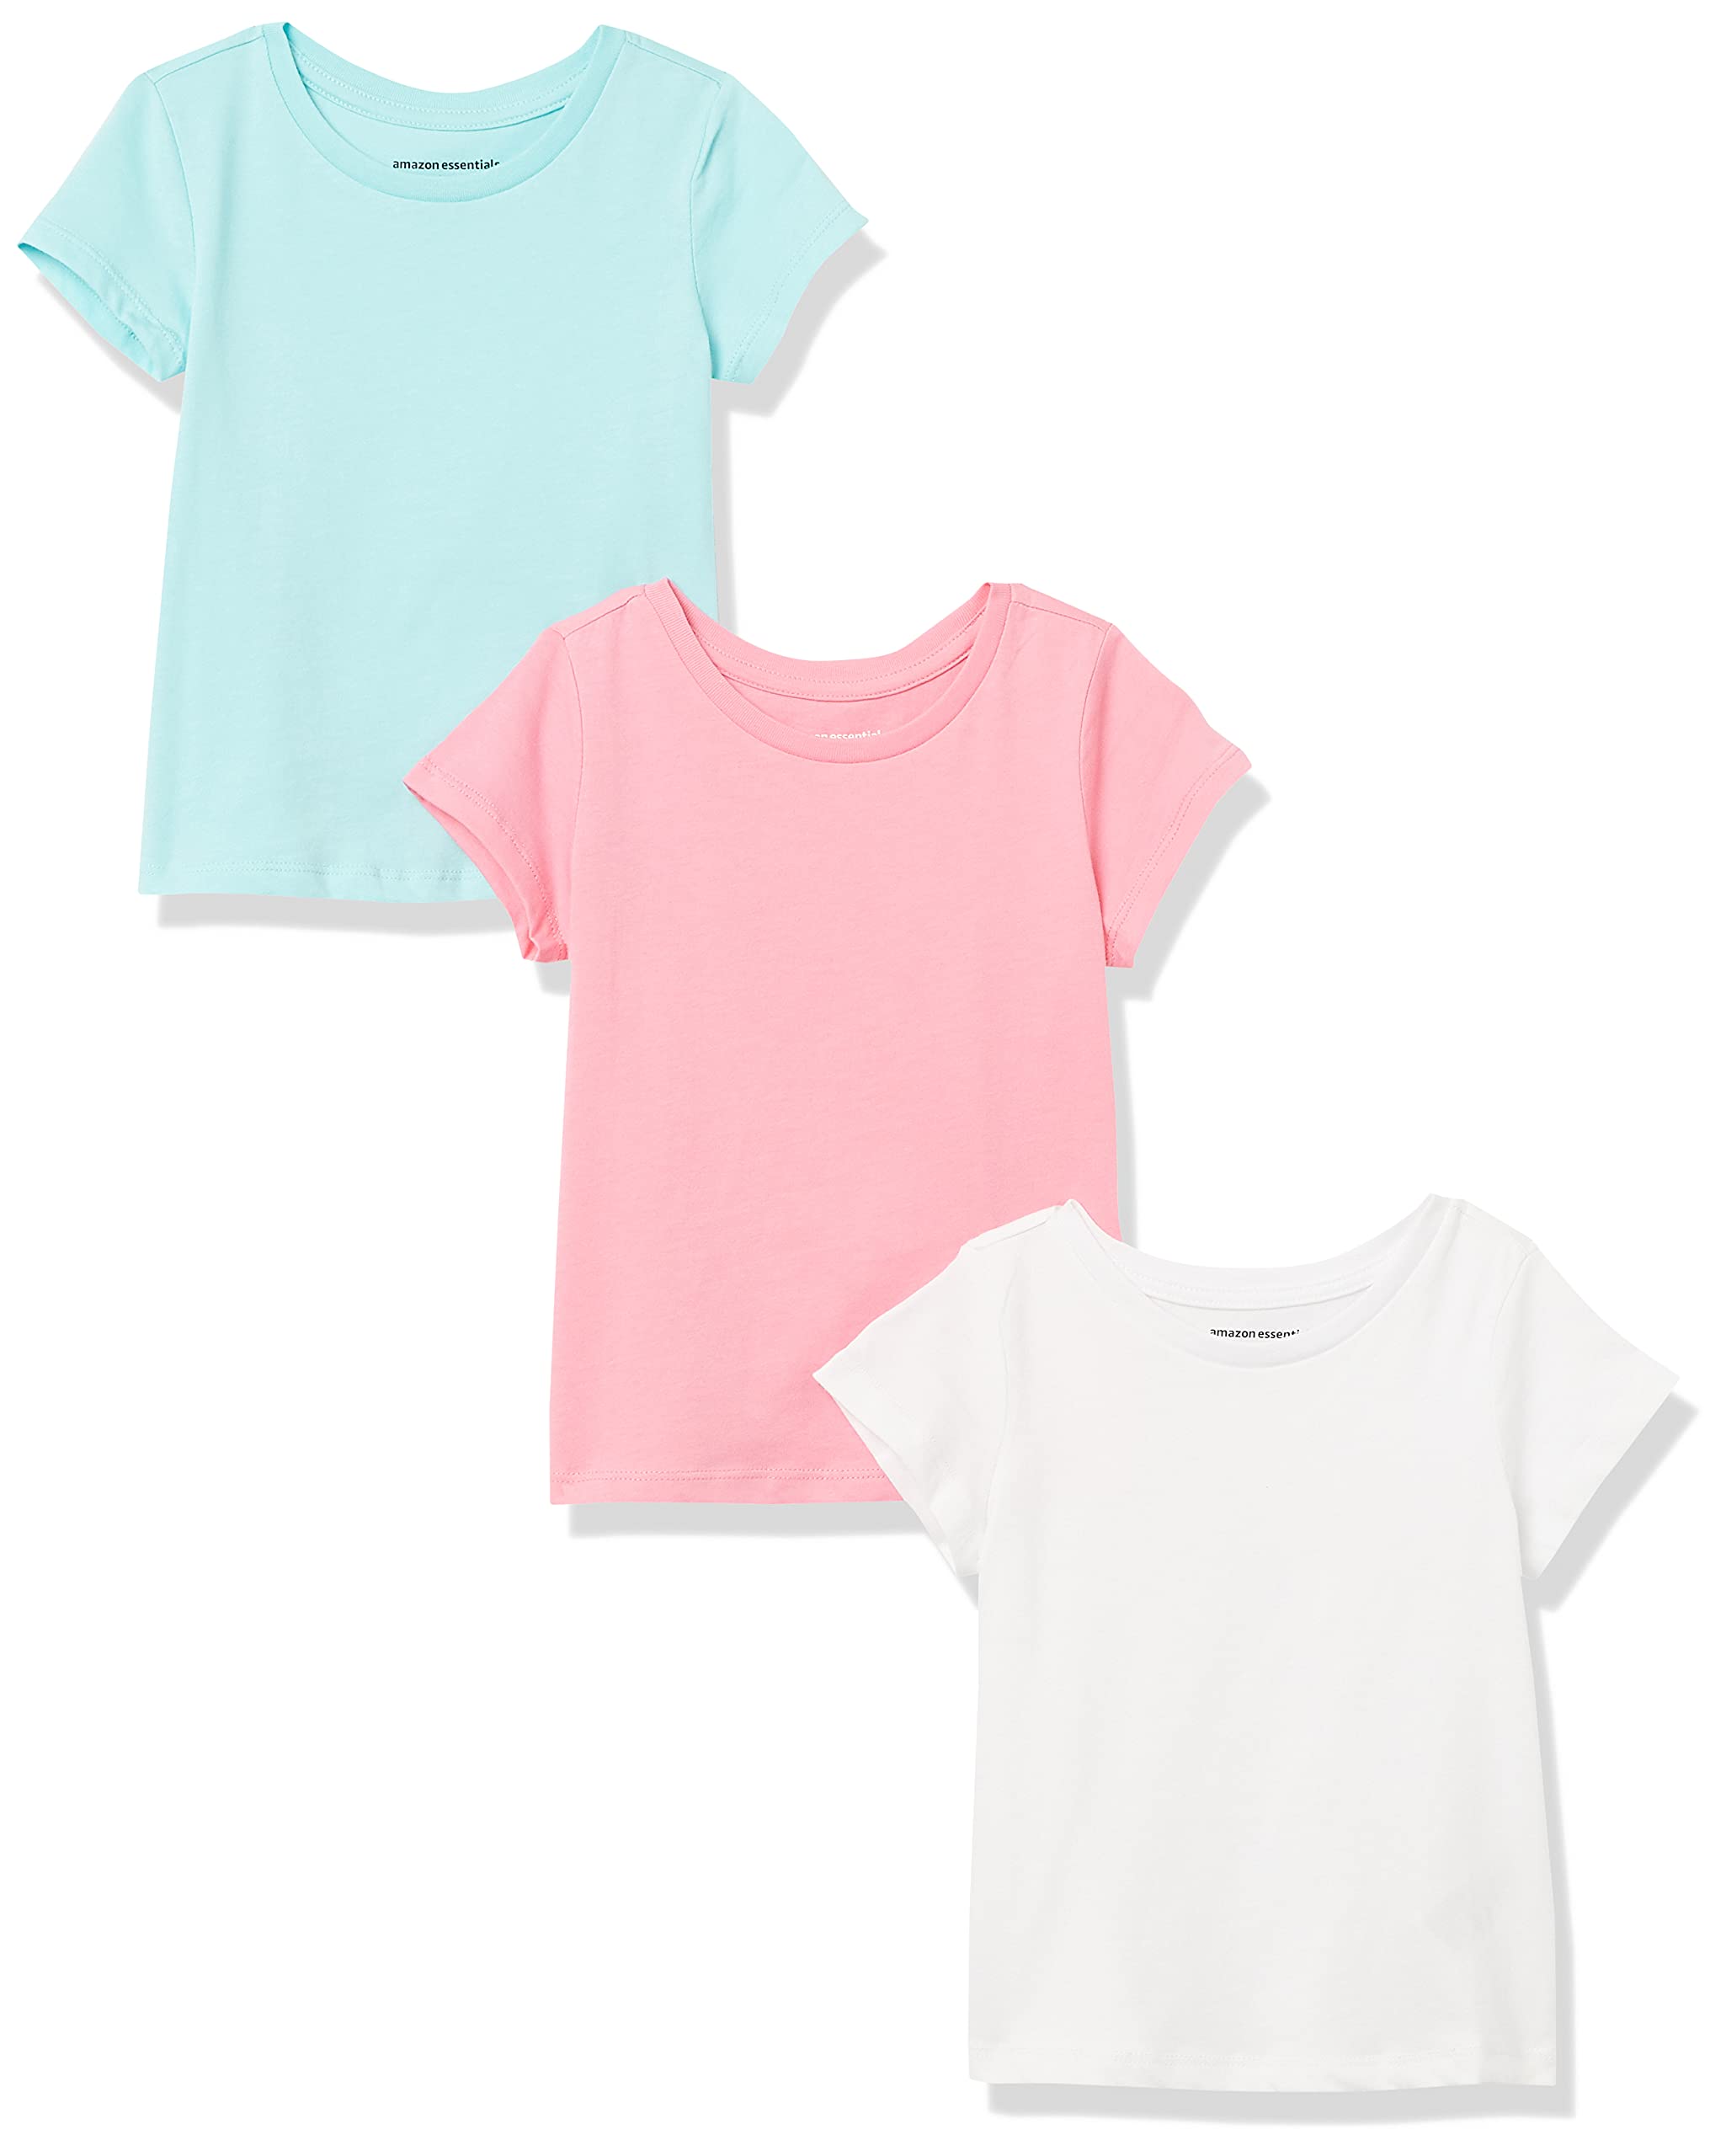 Amazon Essentials Girls and Toddlers' Short-Sleeve T-Shirts, Multipacks